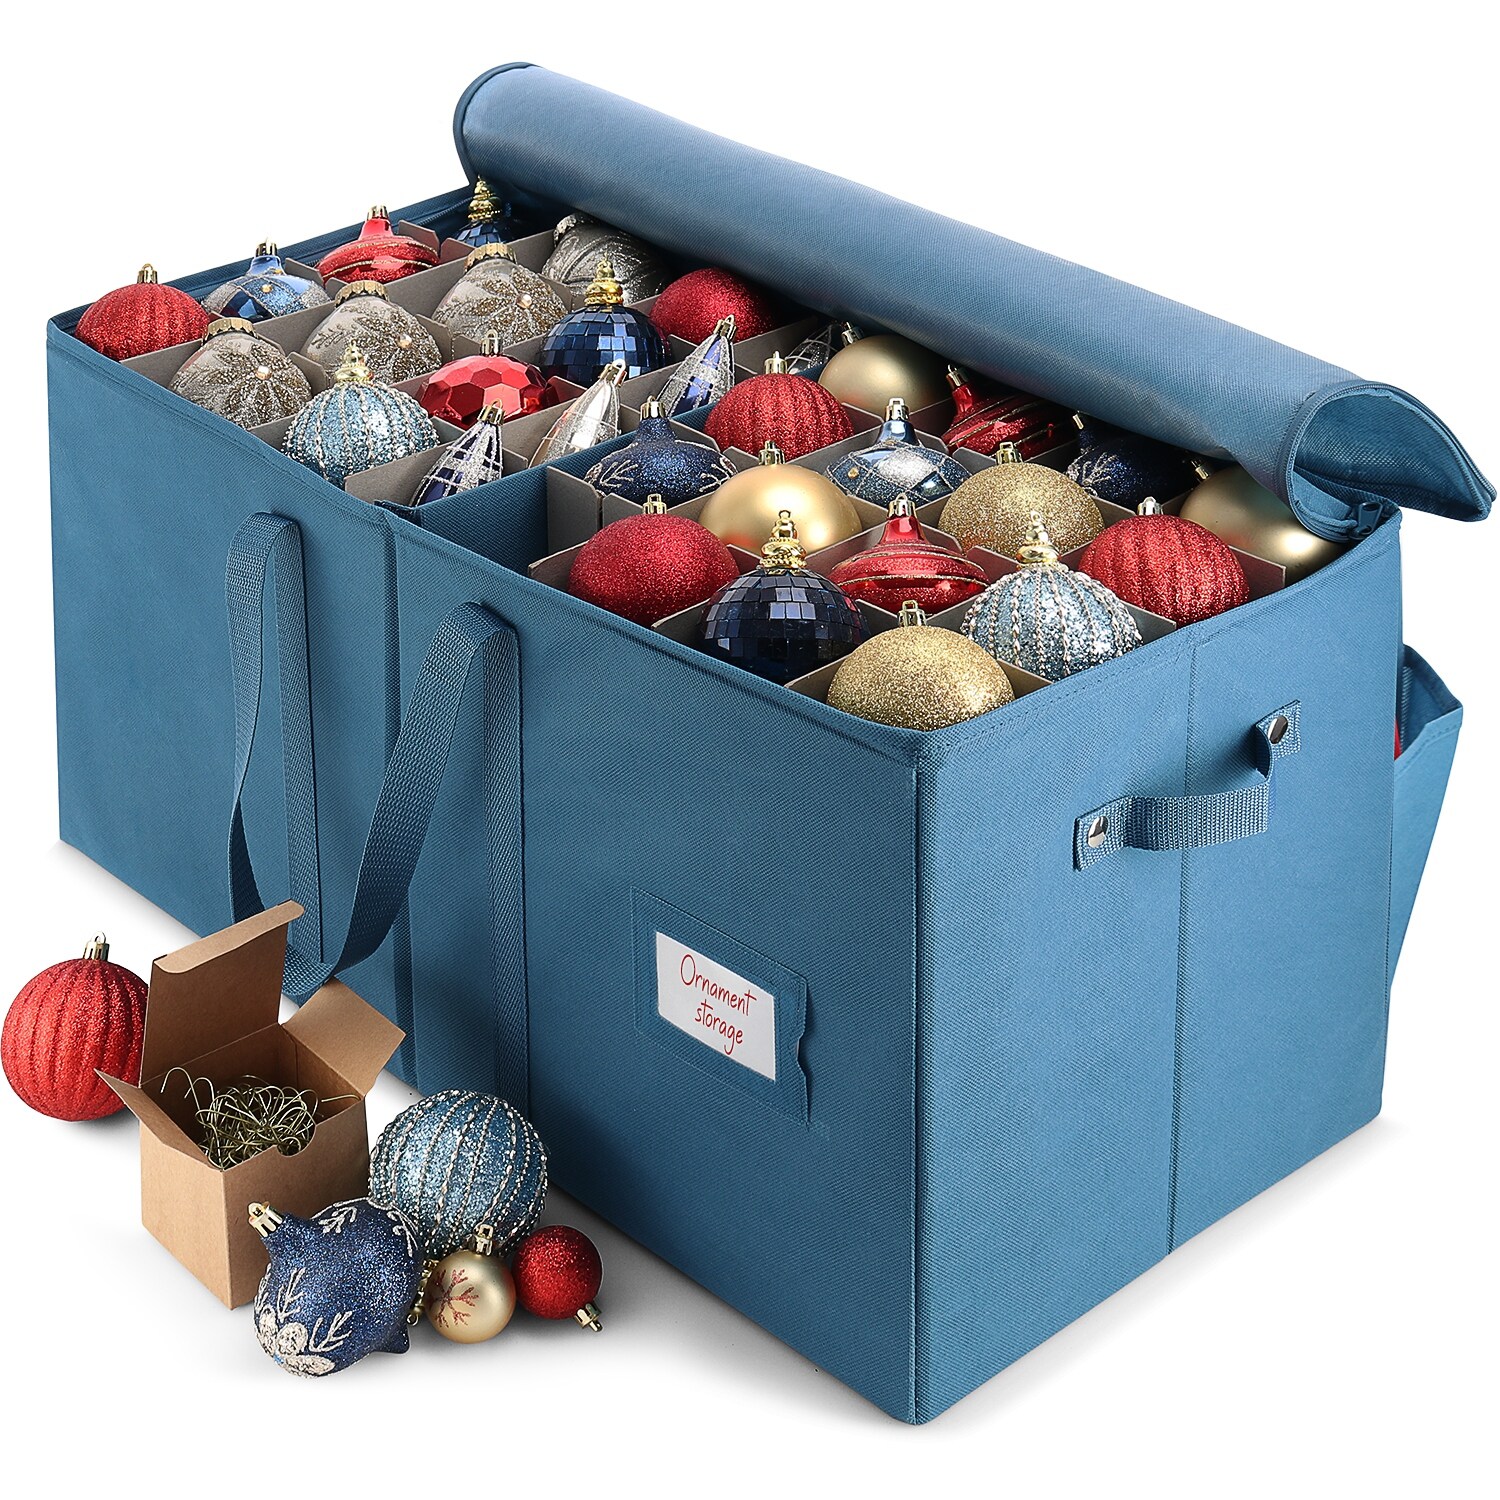 https://ak1.ostkcdn.com/images/products/is/images/direct/fadd637969593dea2bfc7bcff22945e3af60f72d/StorageBud-Large-Christmas-Ornament-Storage-Box-with-Adjustable-Dividers---Ornament-Storage-Container-For-128-Holiday-Ornaments.jpg